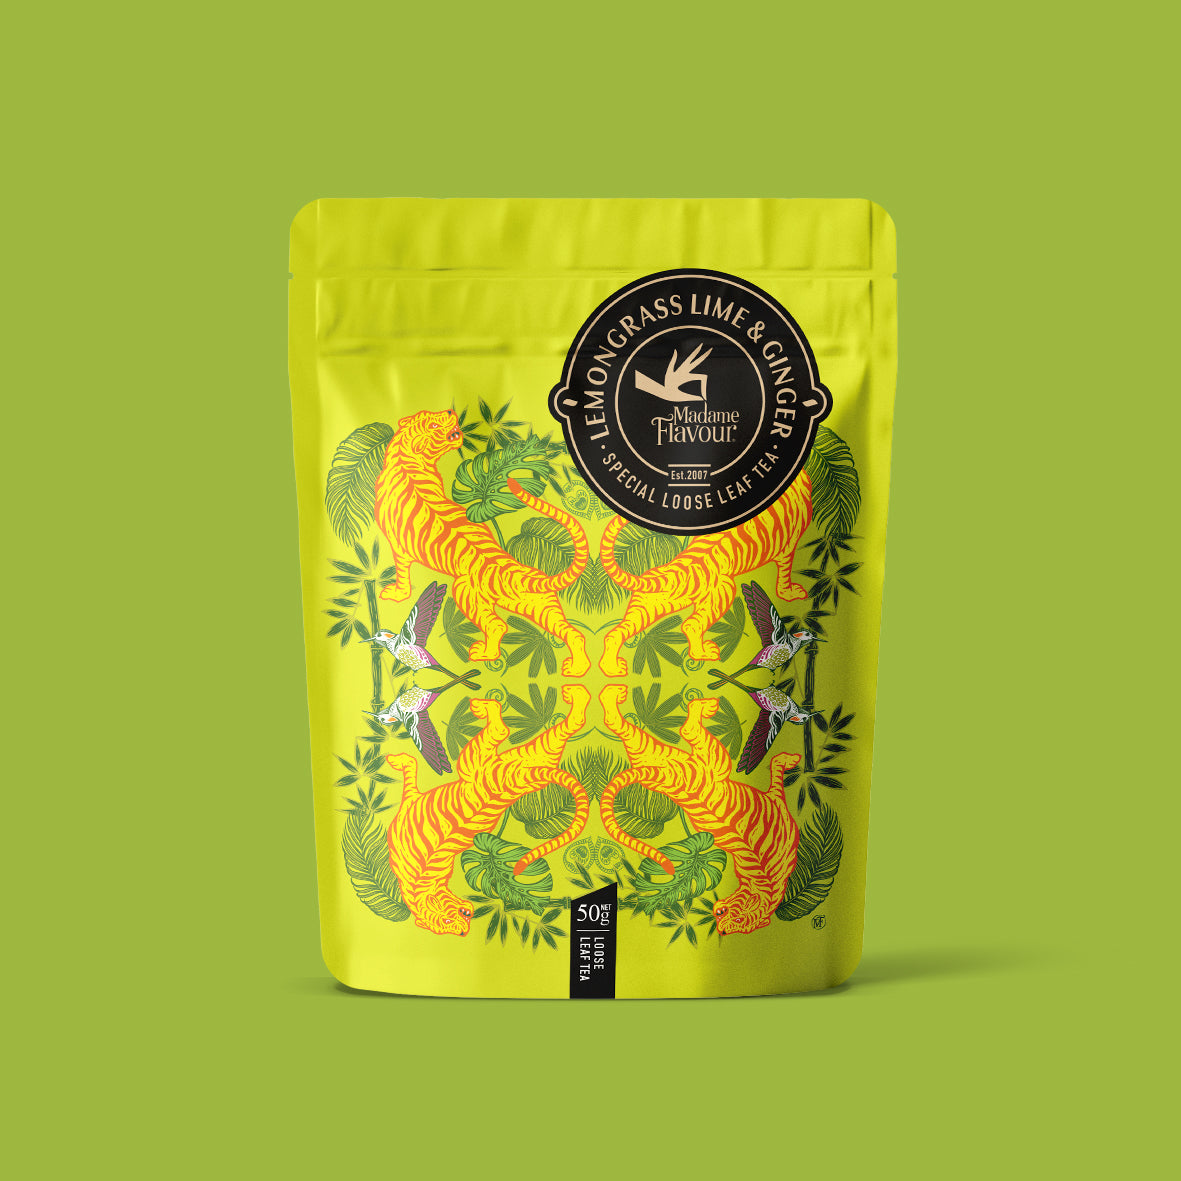 Madame's Lemongrass Lime & Ginger Loose Leaf 50g Pouch